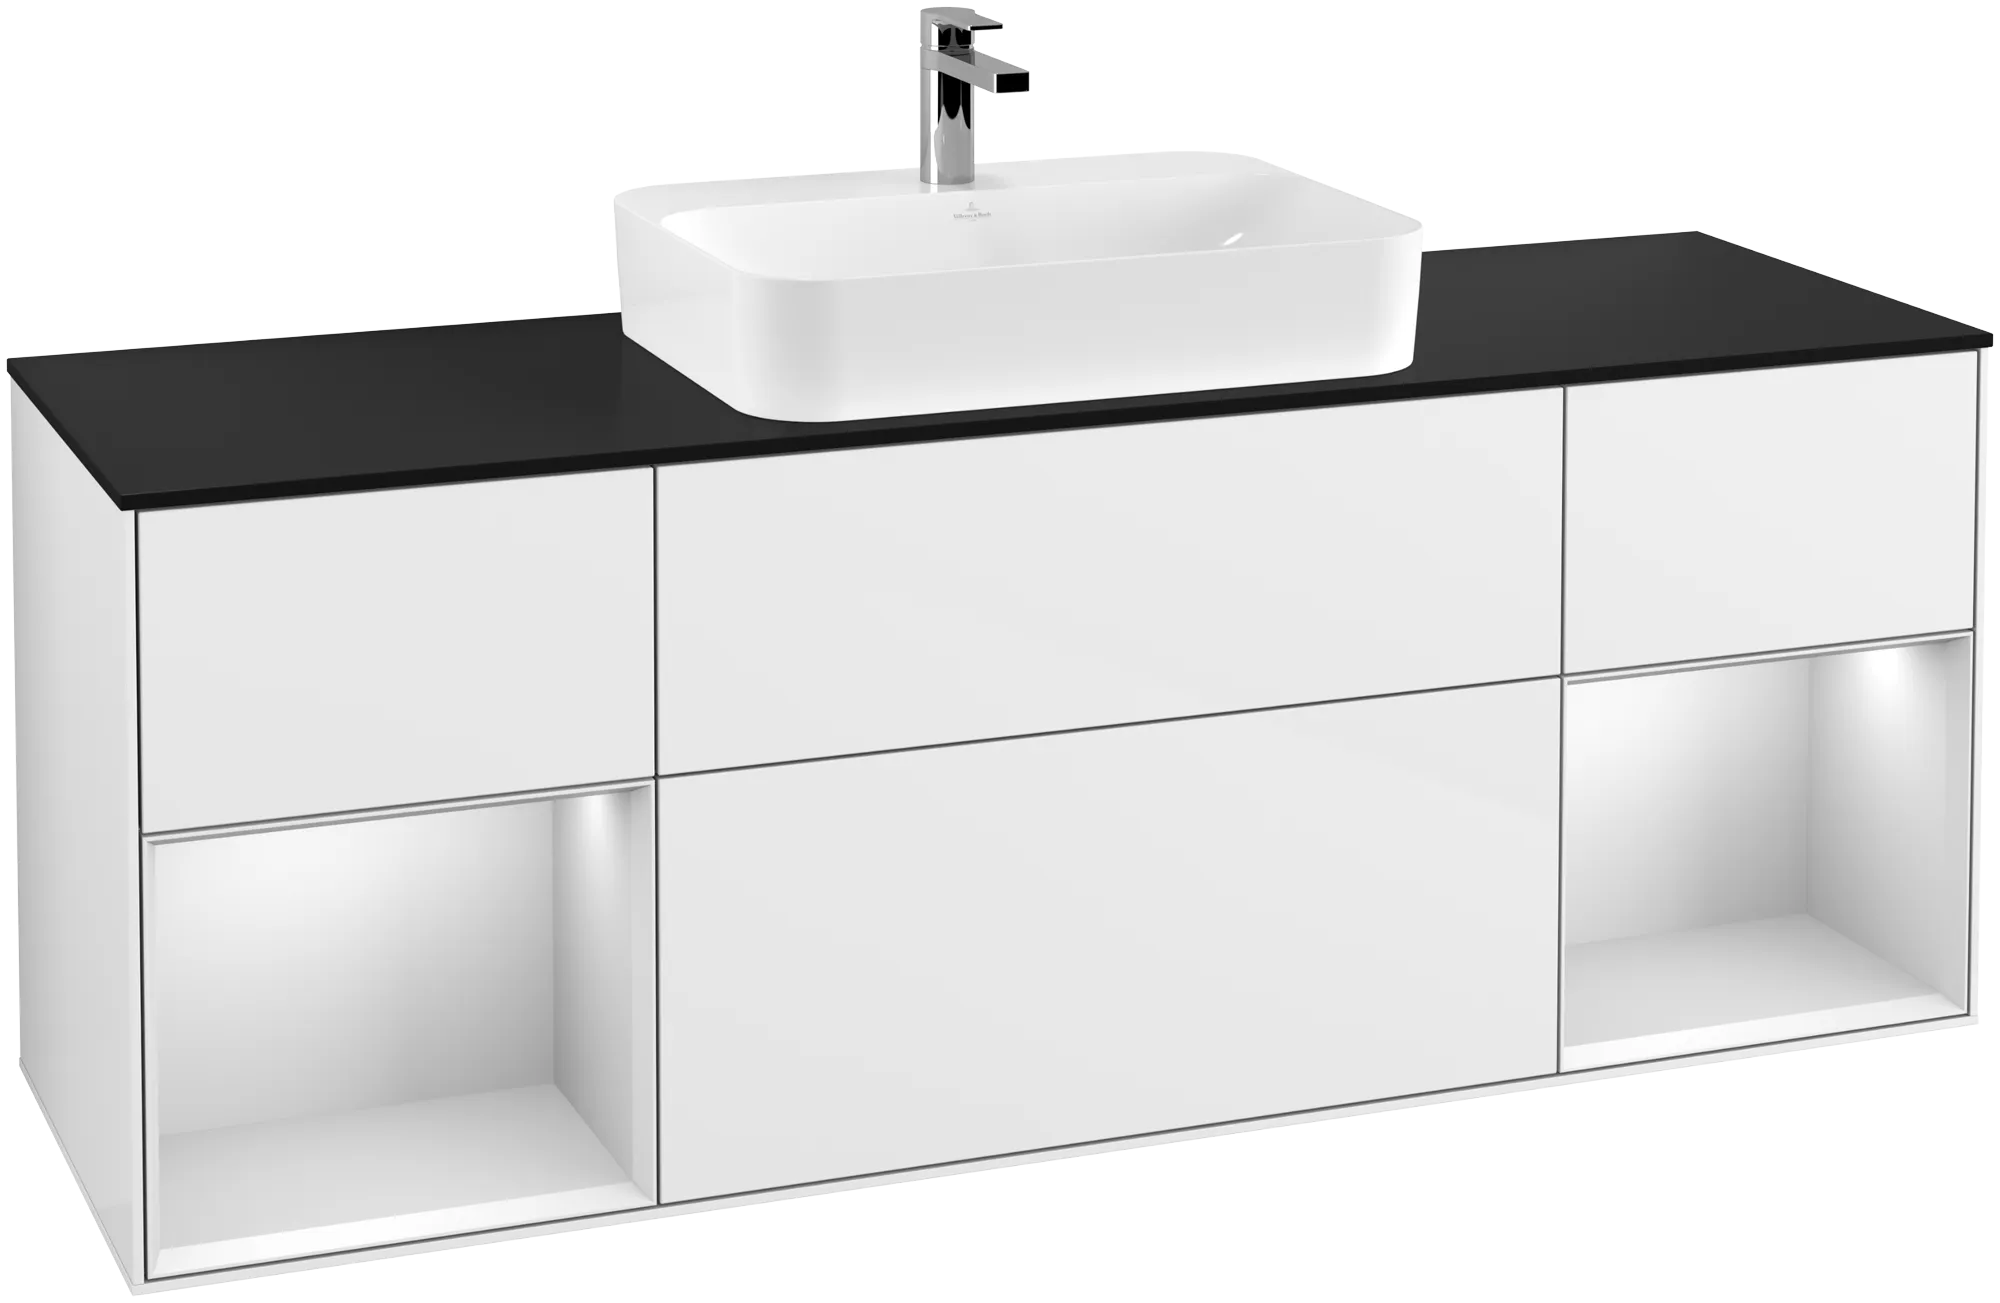 Picture of VILLEROY BOCH Finion Vanity unit, with lighting, 4 pull-out compartments, 1600 x 603 x 501 mm, Glossy White Lacquer / White Matt Lacquer / Glass Black Matt #G452MTGF